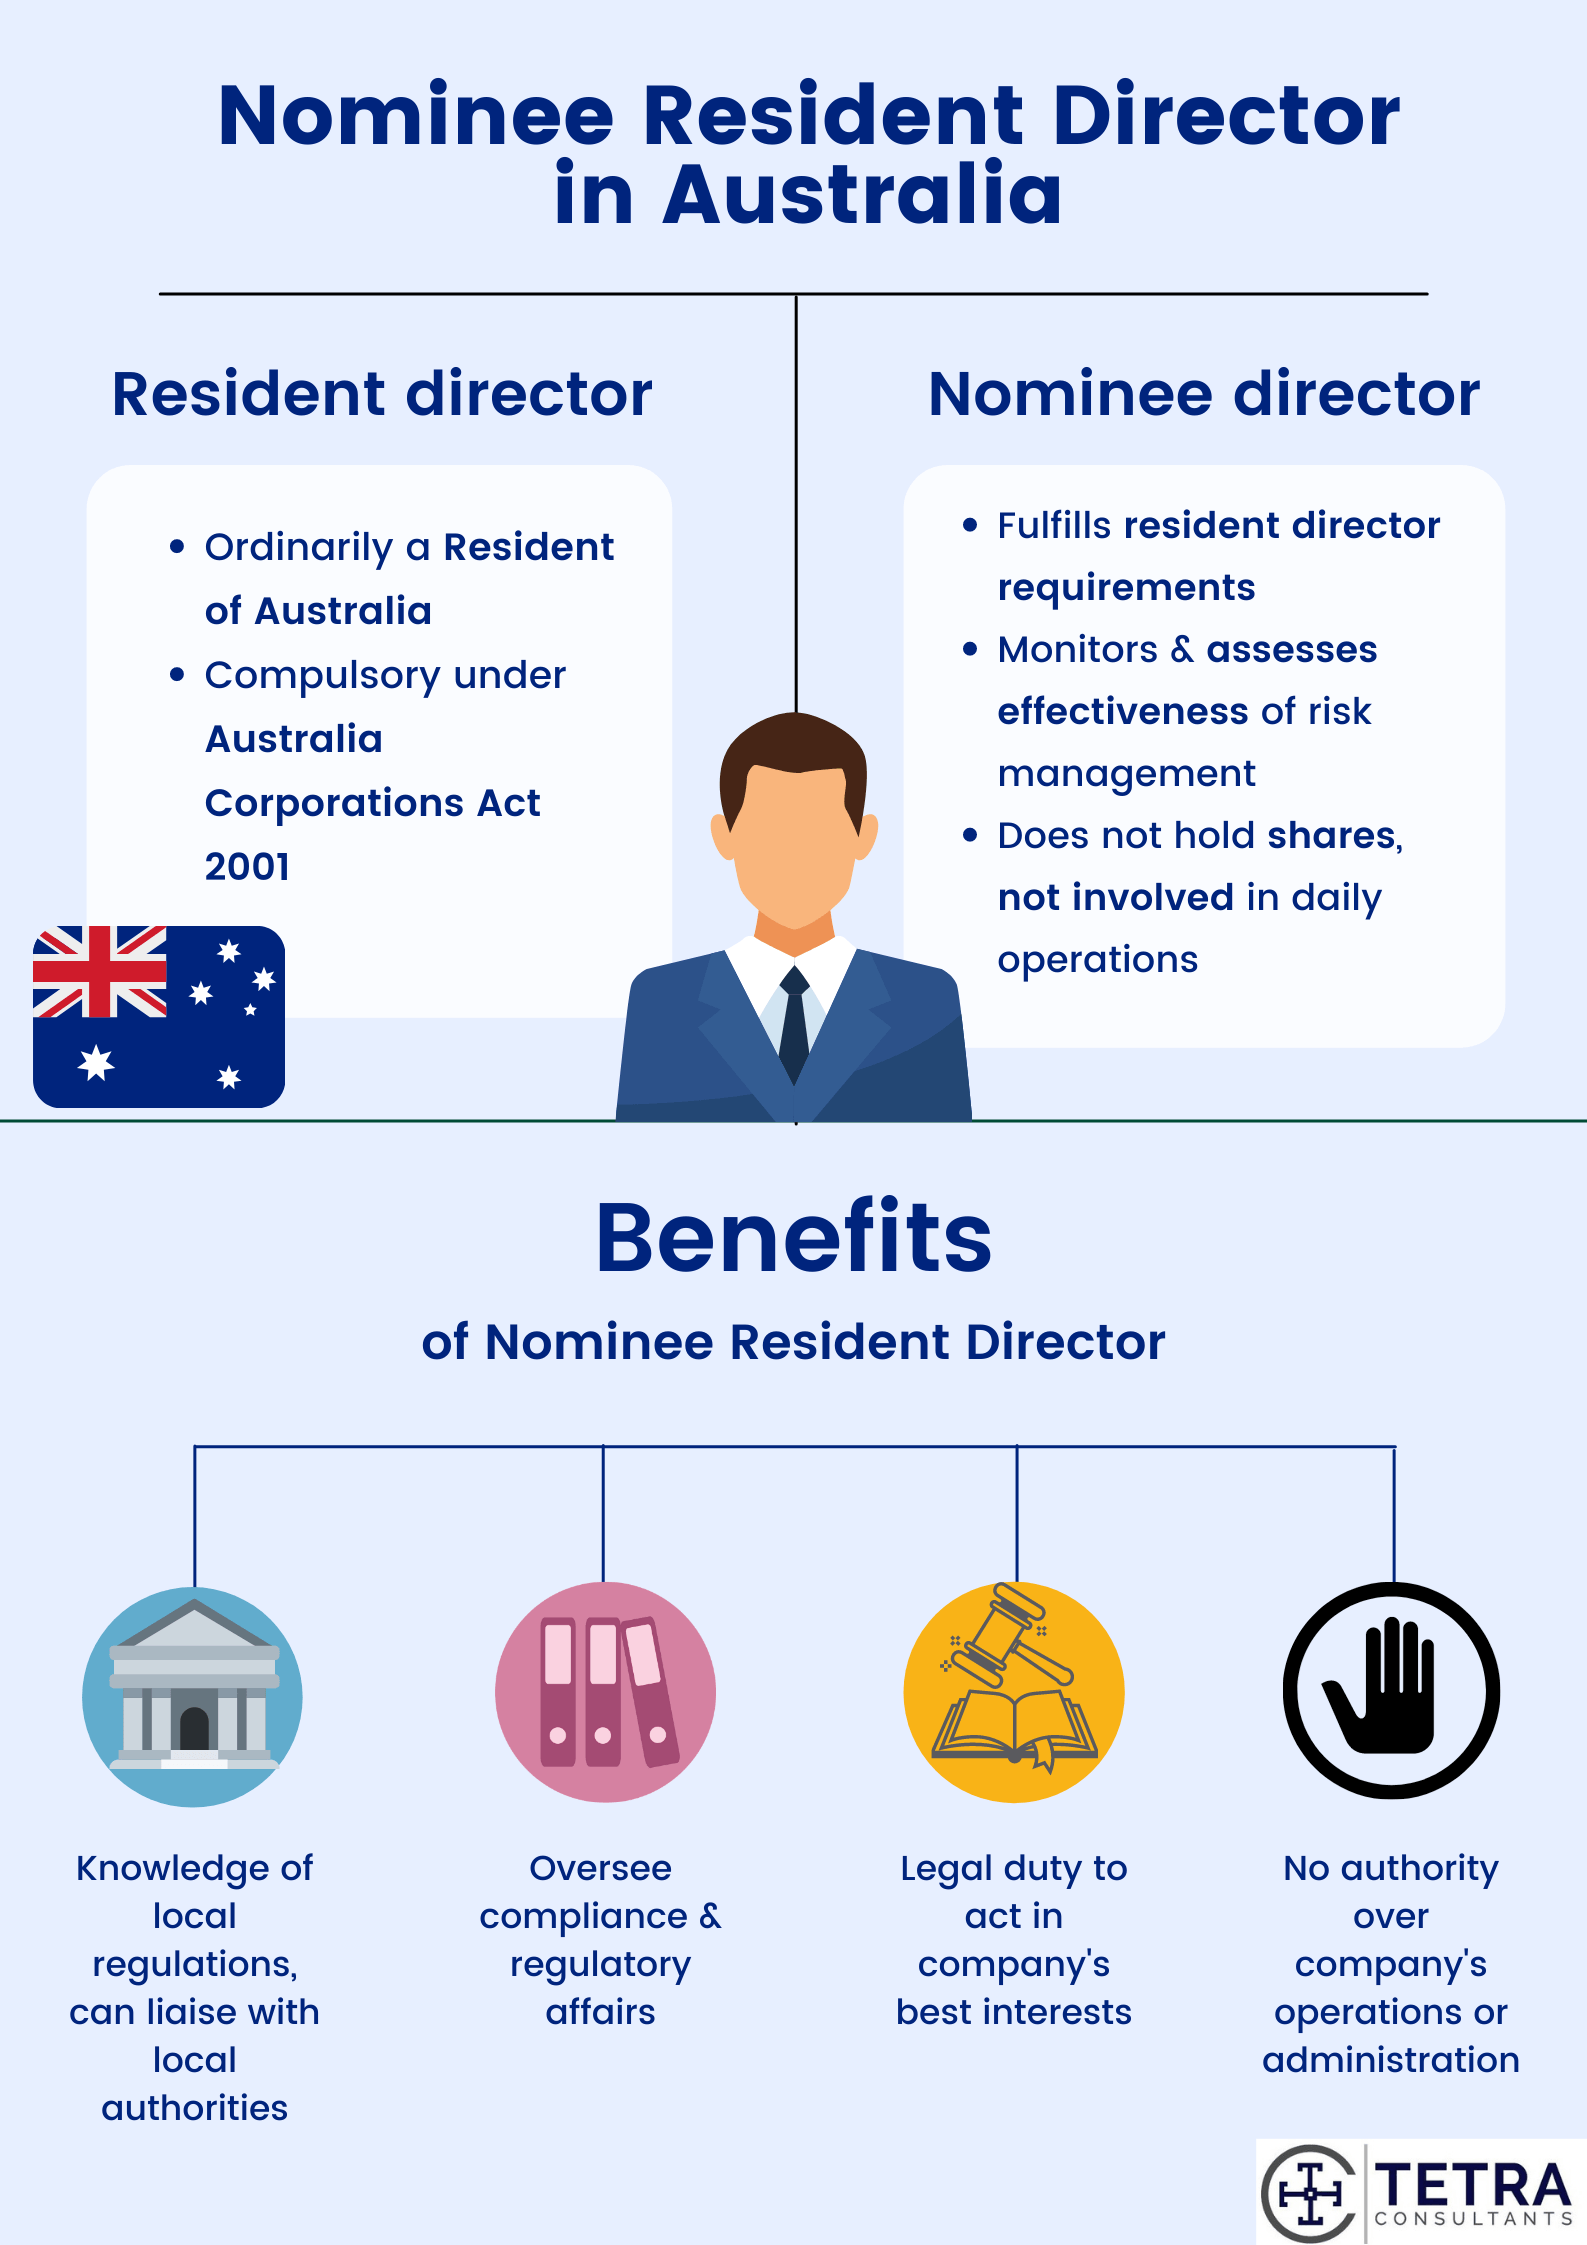 What is a resident director in Australia and why is it needed